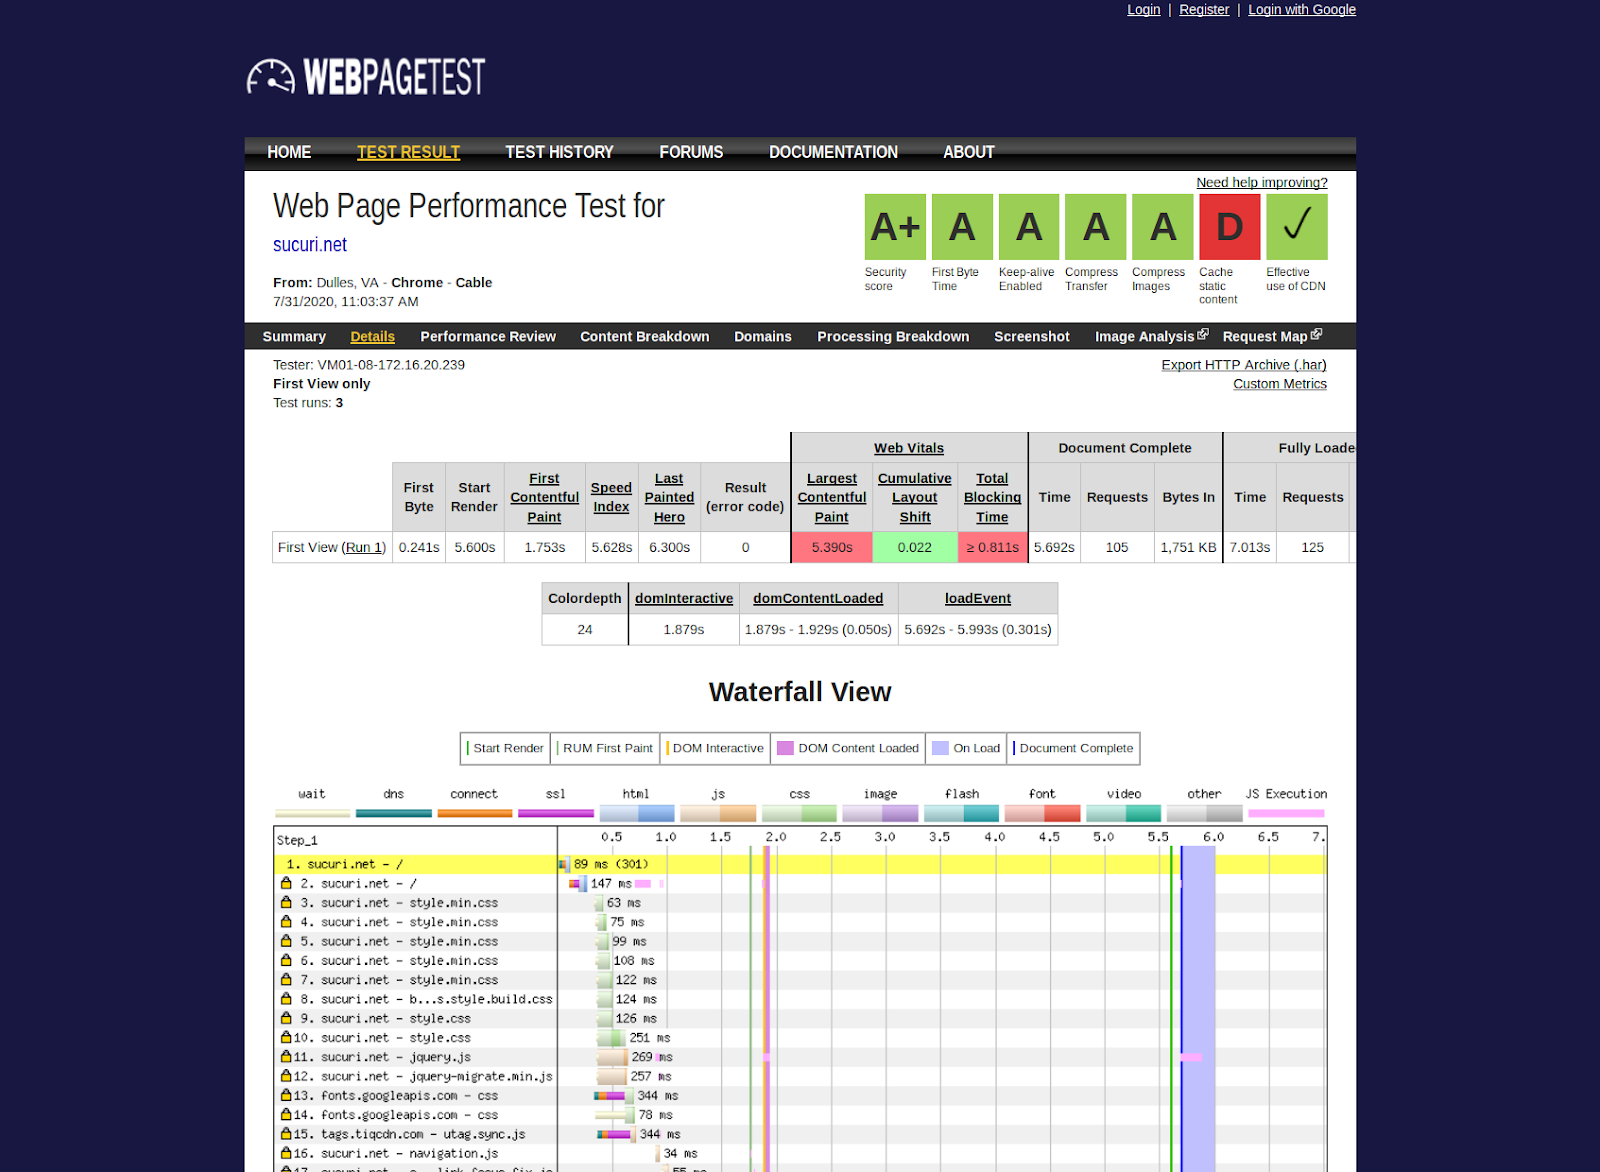 Performance test results for website